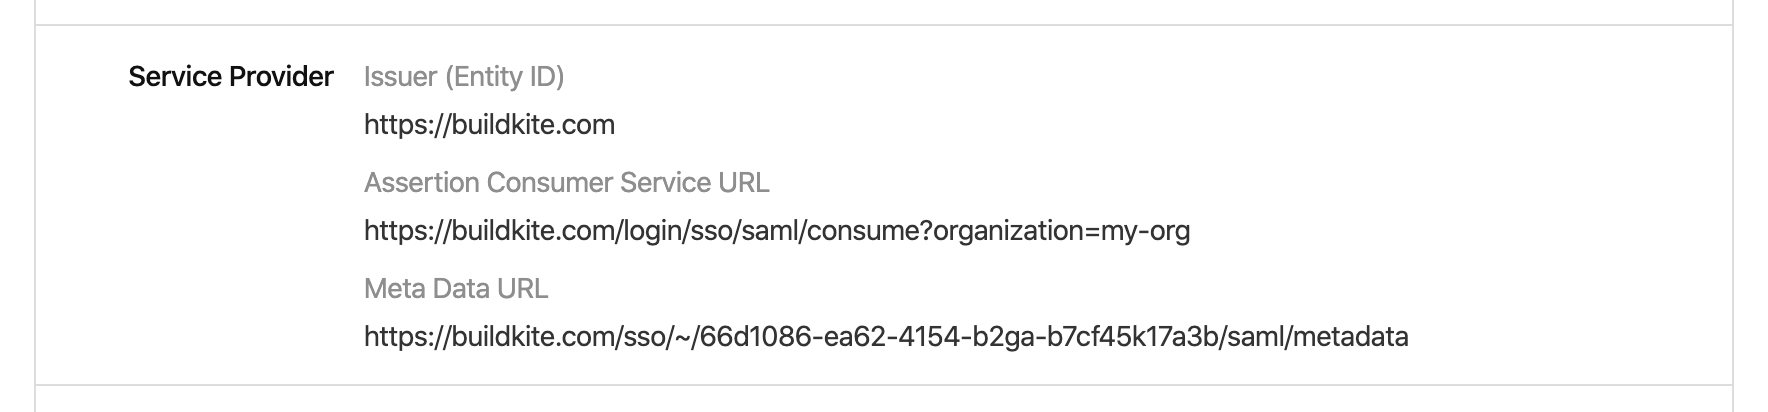 Screenshot of the Service Provider section in the Custom SAML SSO Provider details page